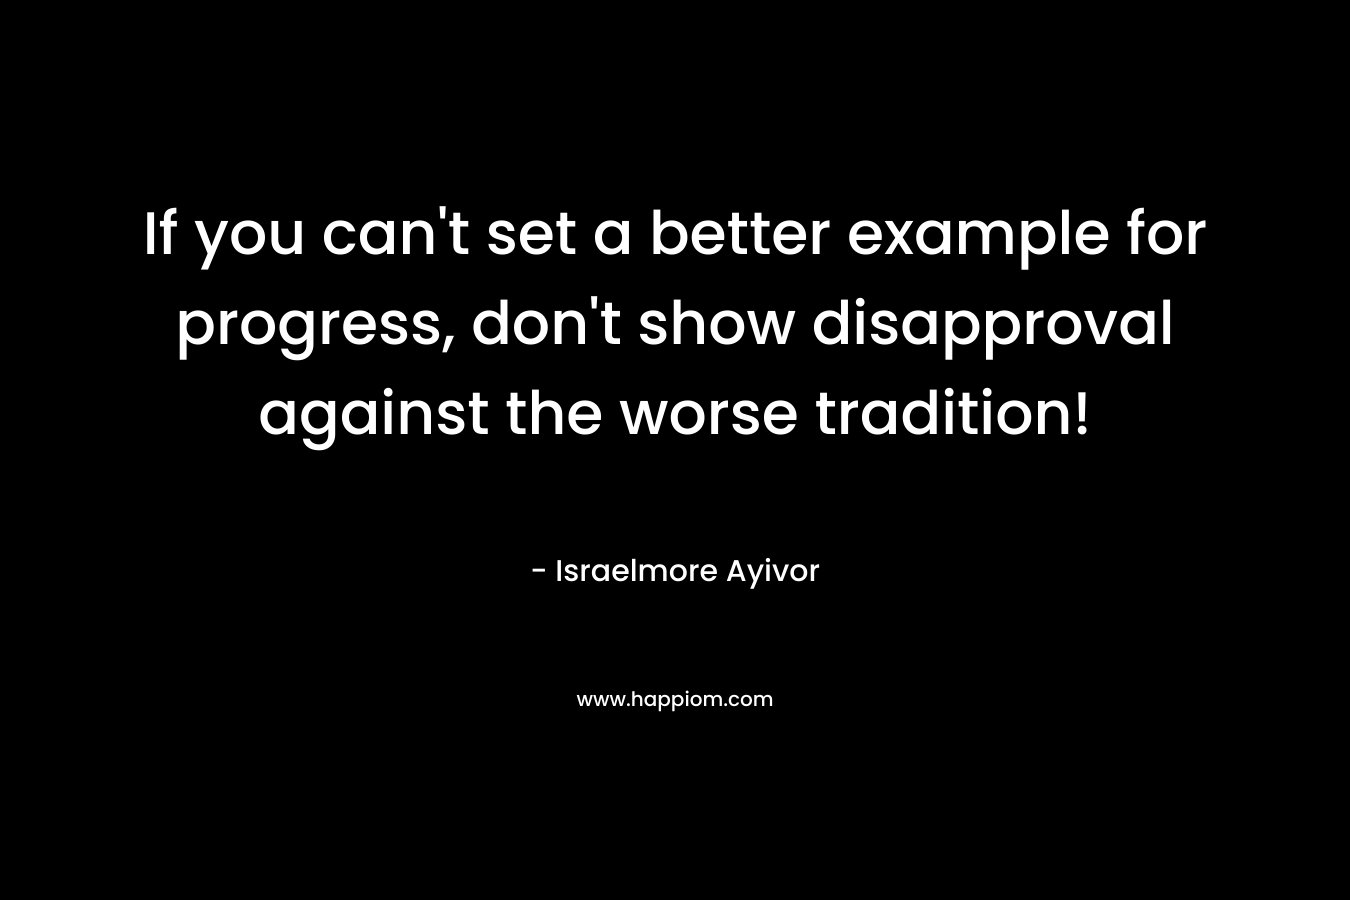 If you can't set a better example for progress, don't show disapproval against the worse tradition!